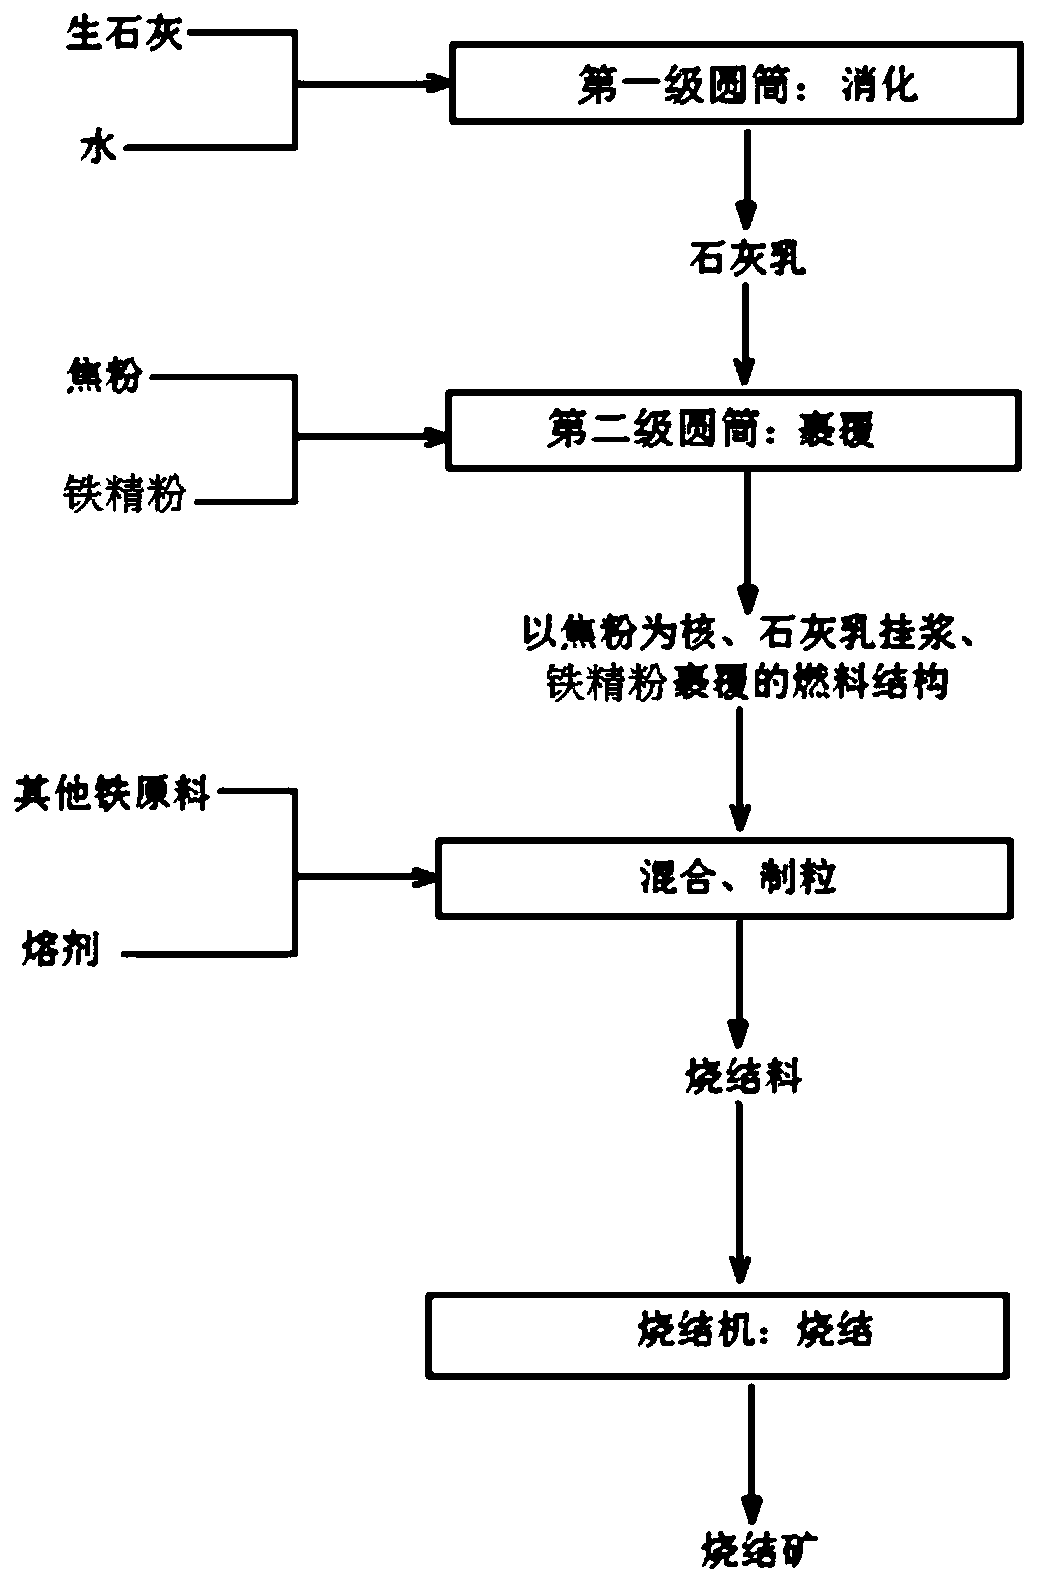 Coke powder pretreatment process for sintering and iron ore sintering process and system